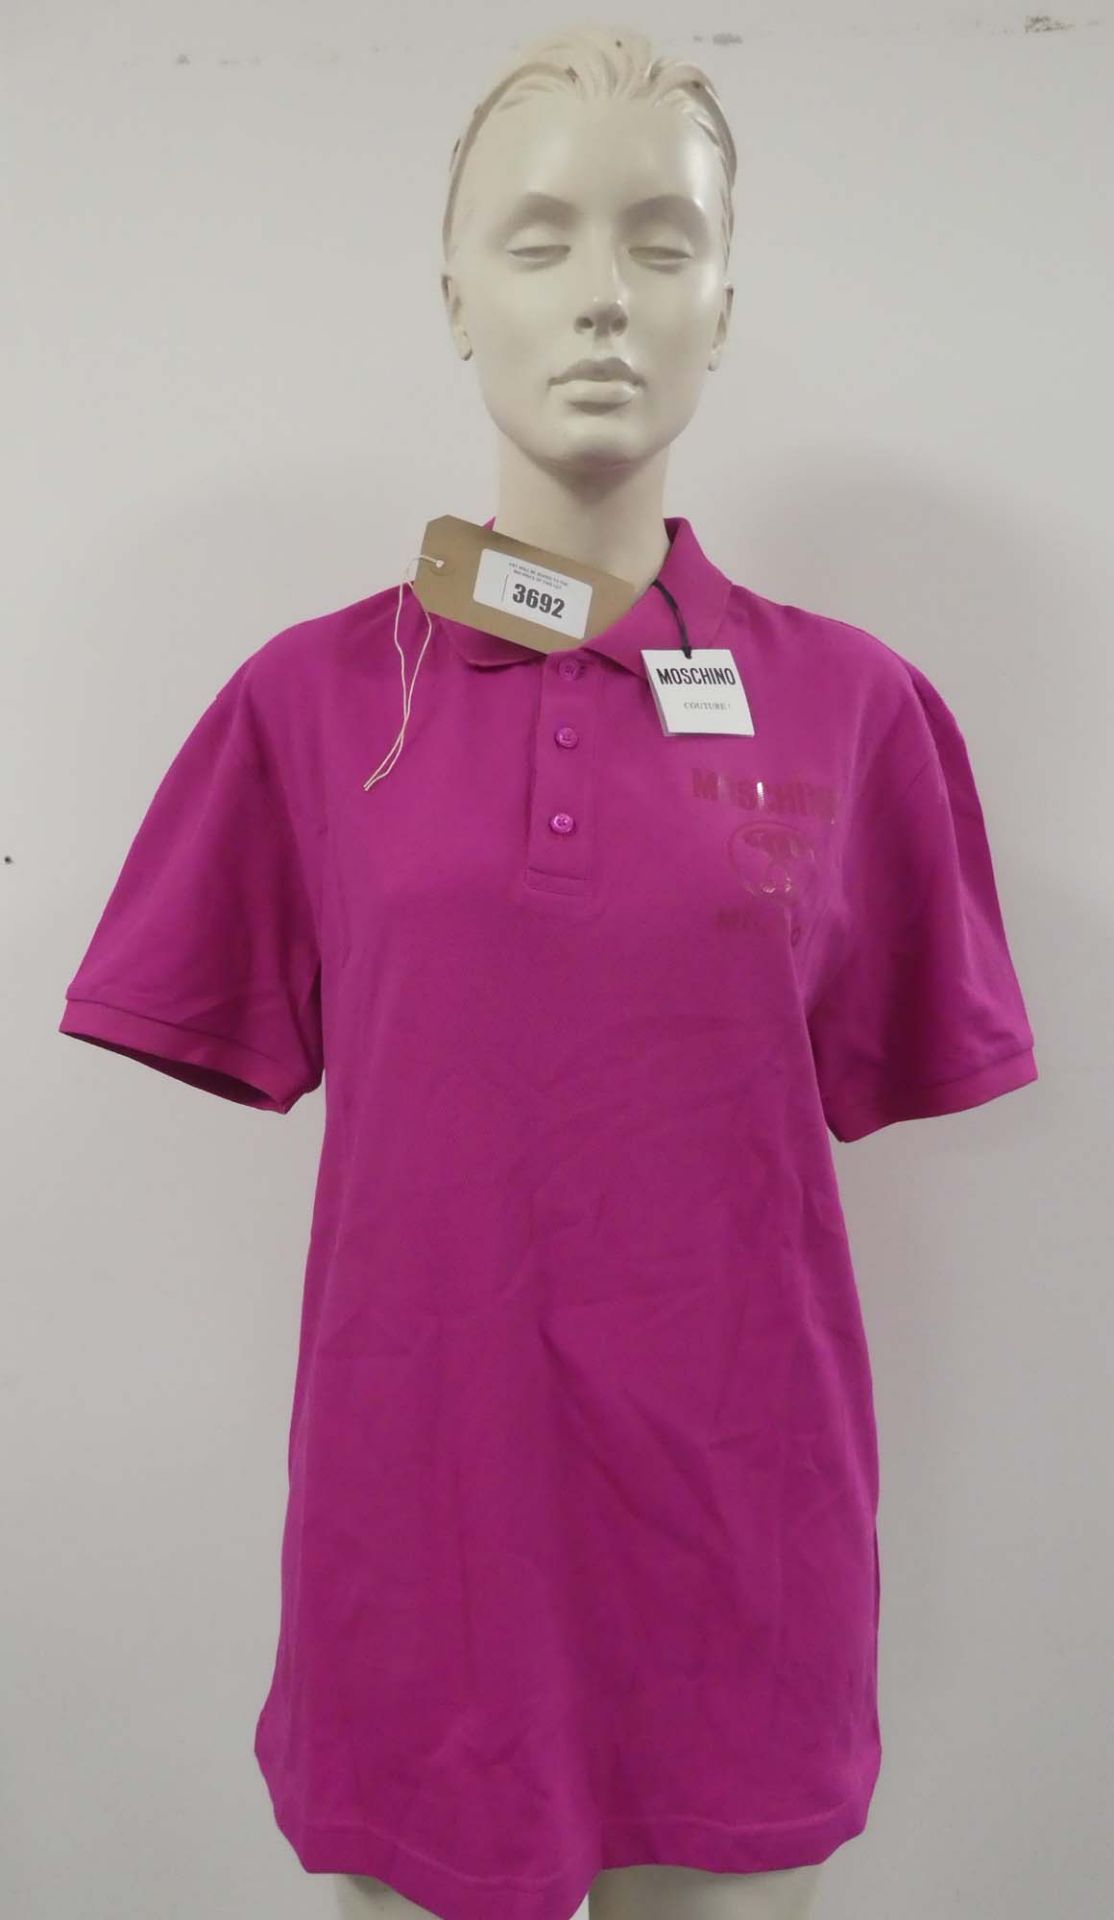 Moschino Couture polo in loud pink size medium